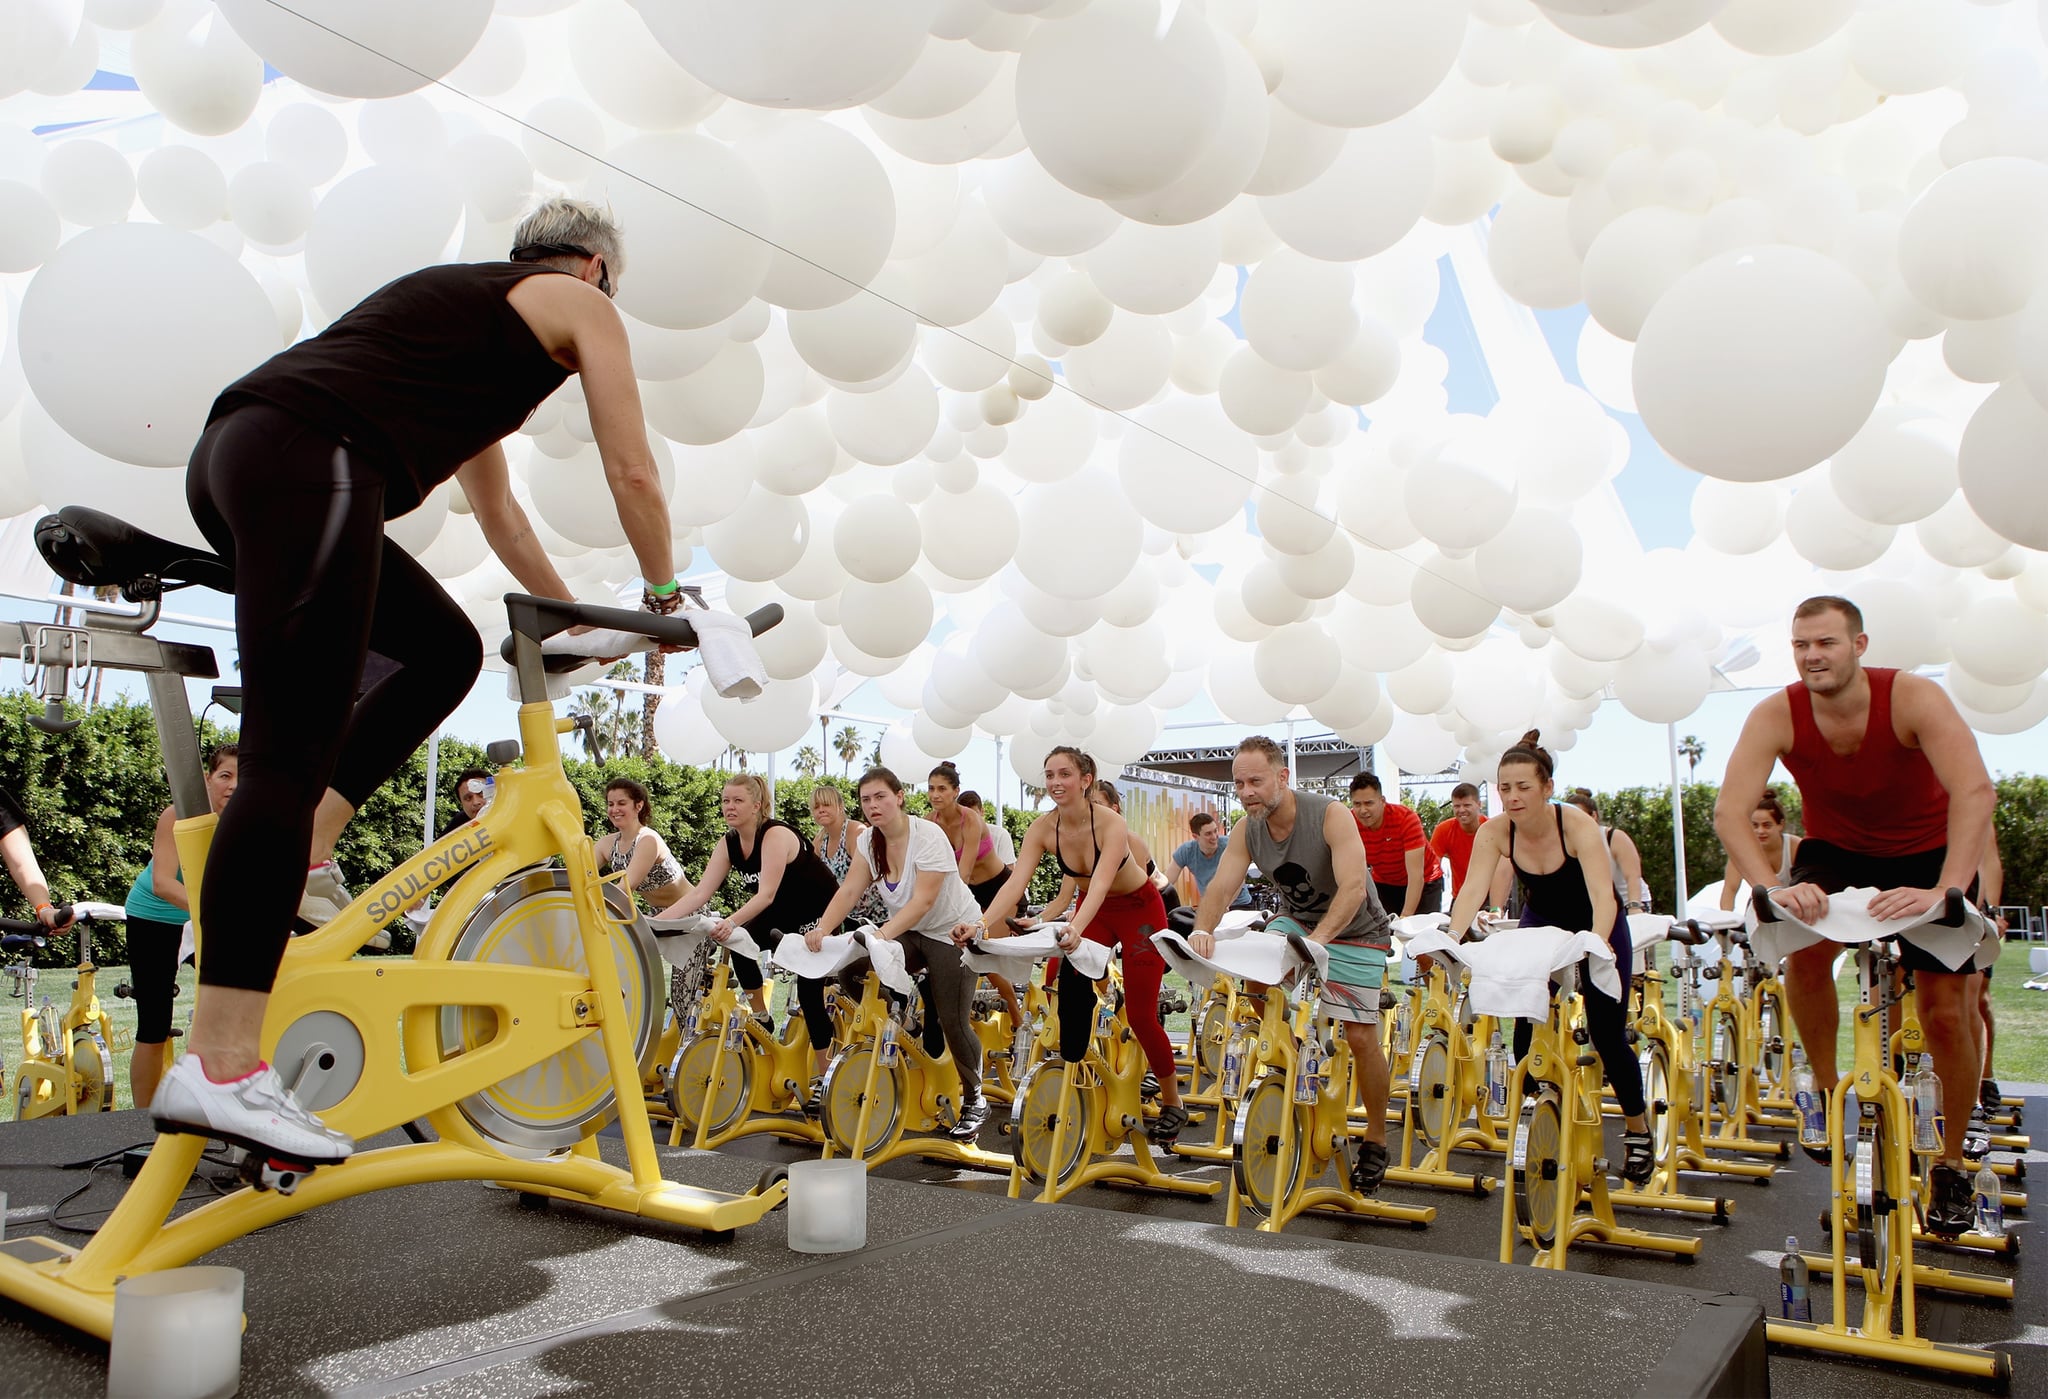 PALM SPRINGS, CA - APRIL 15:  Guests workout at the SoulCycle studio at the American Express Platinum House at The Parker Palm Springs on April 14, 2017 in Palm Springs, California.  (Photo by Ari Perilstein/Getty Images for American Express)